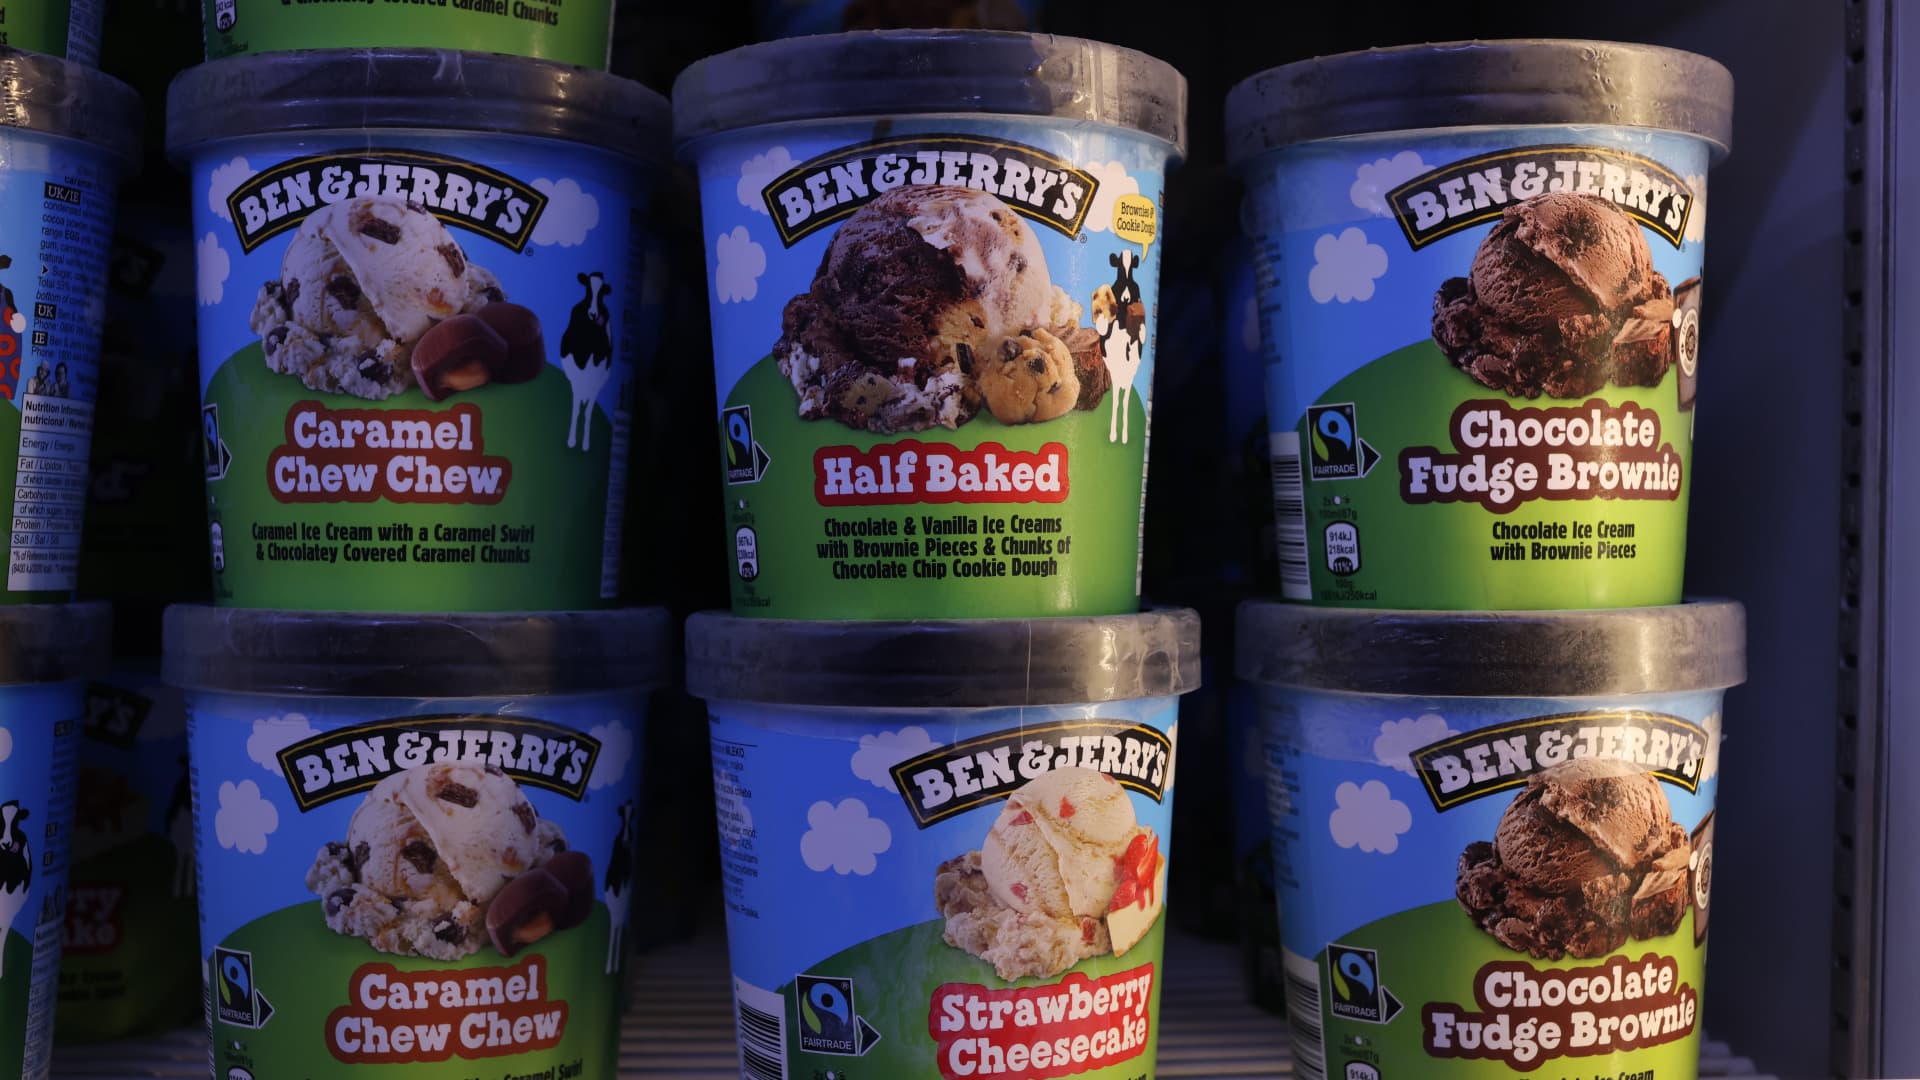 Unilever pops 6% on guidance raise, says Ben & Jerry’s spinoff on track [Video]